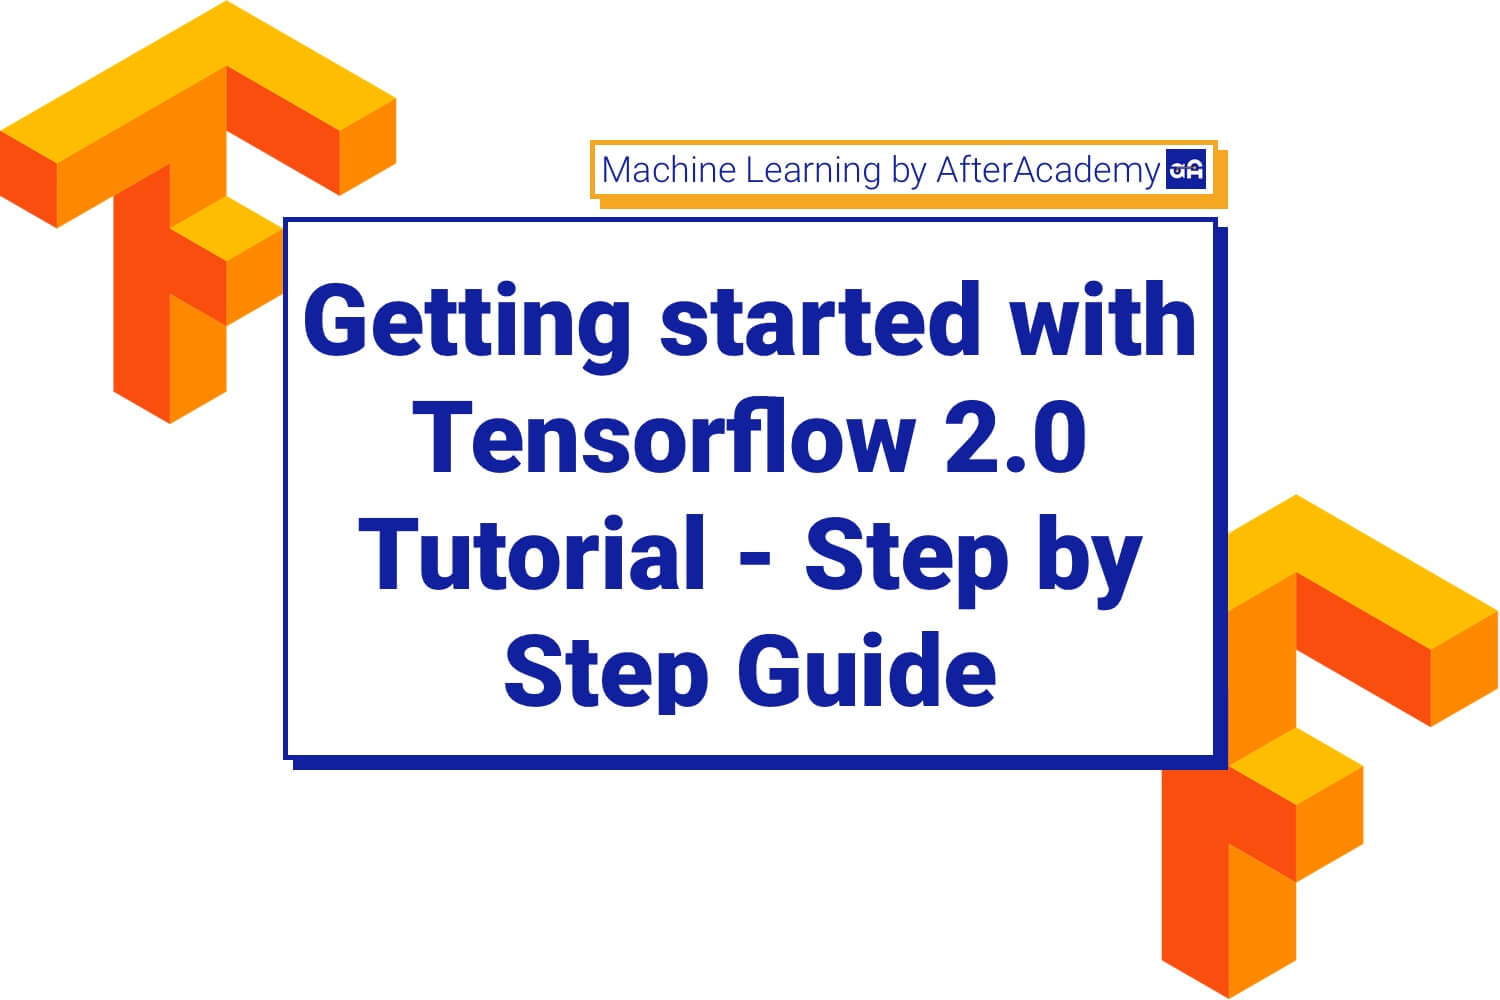 Getting started with Tensorflow 2.0 Tutorial - Step by step Guide